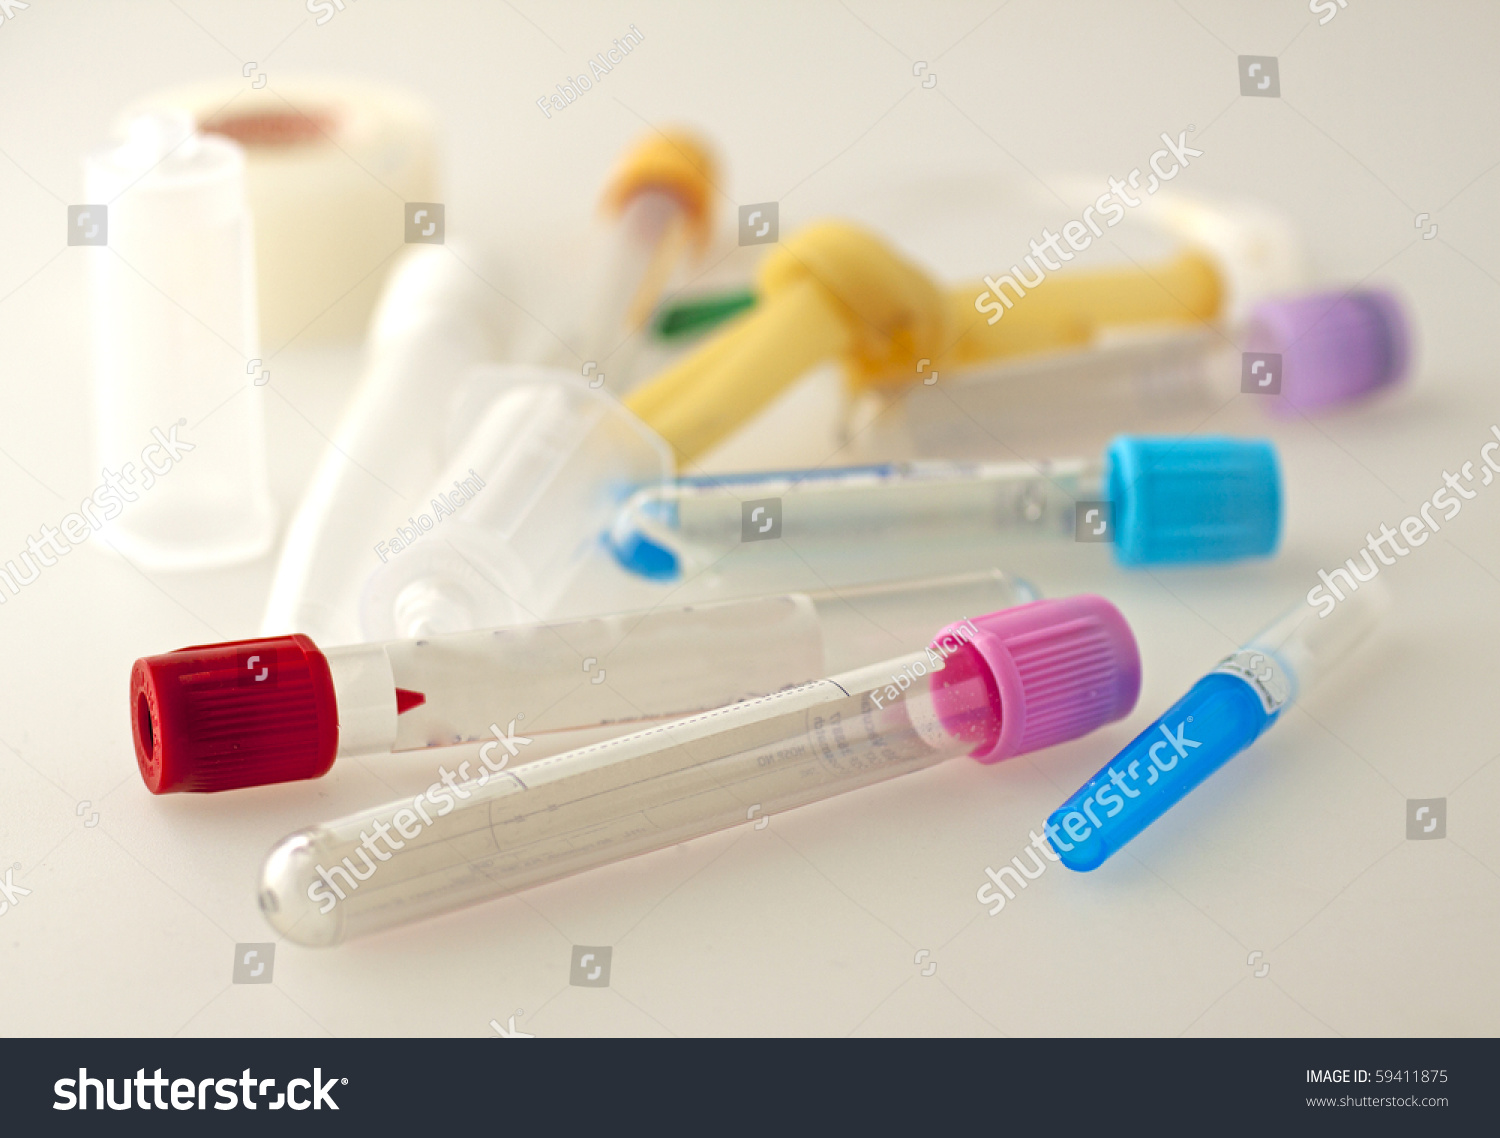 Test Tubes, Tourniquet, Butterfly Needle And Other Medical Equipment ...